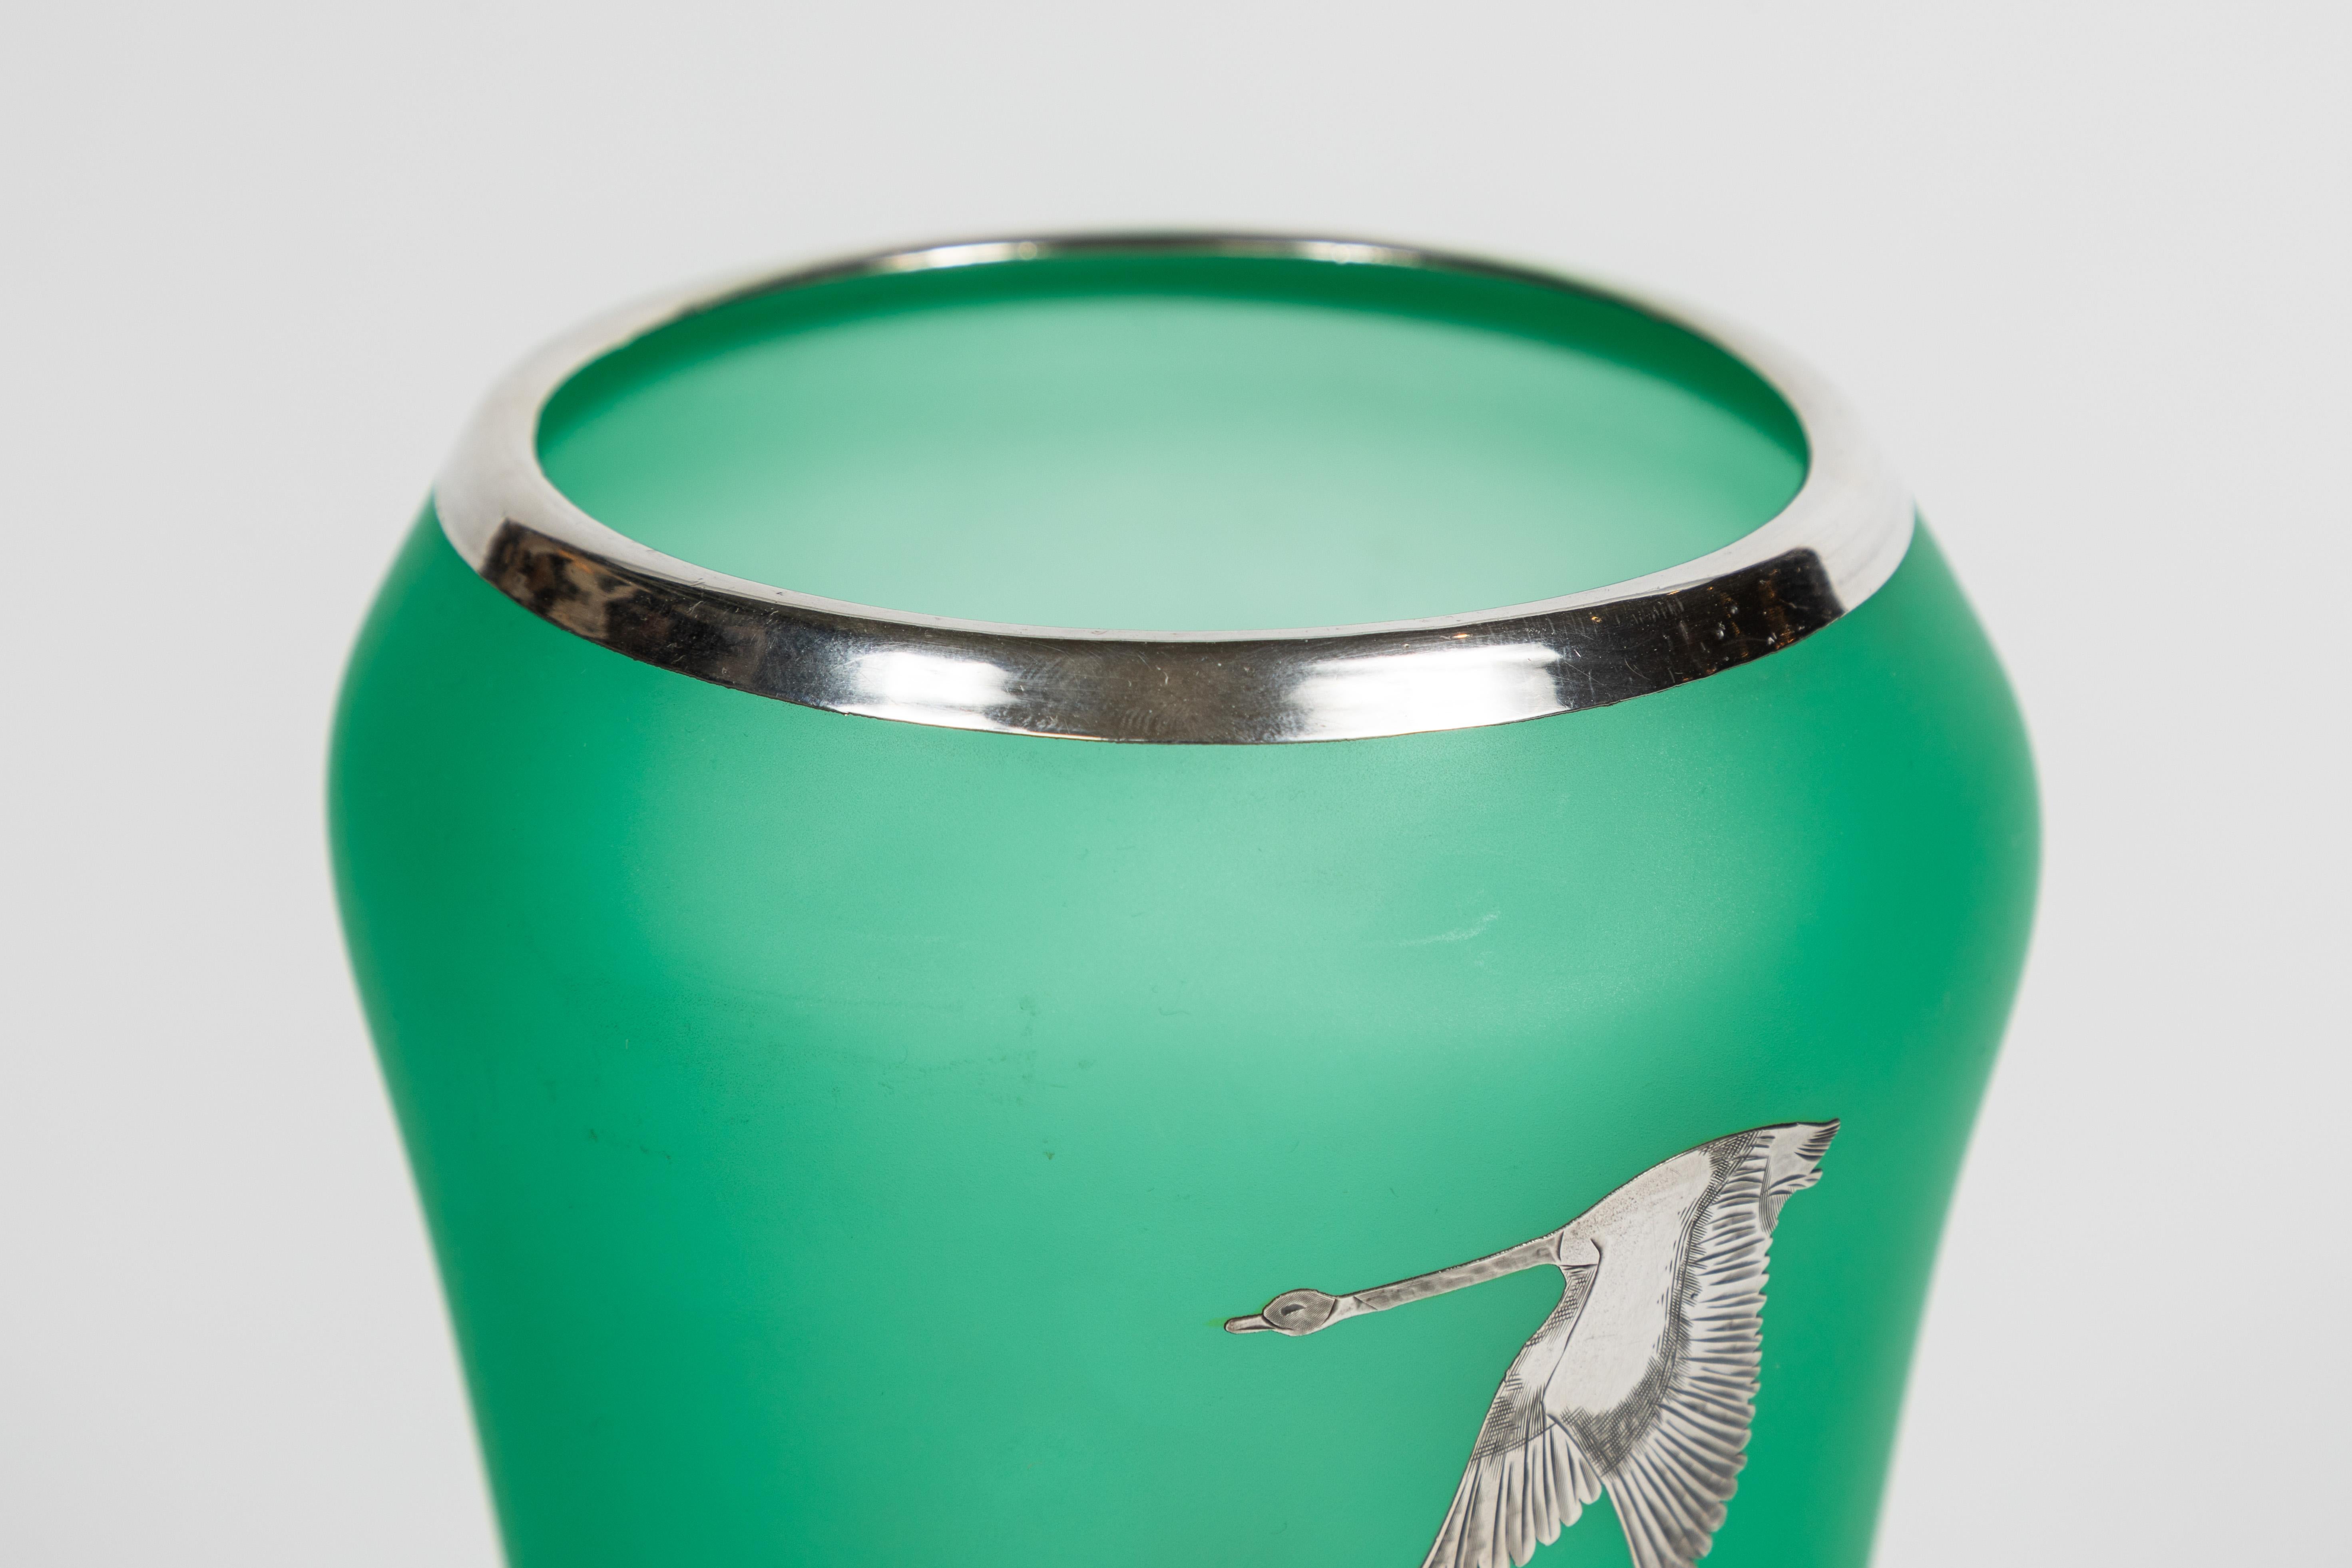 Art Deco Tiffin green satin glass vase with Canada geese and pine trees motif, Rockwell silver overlay, circa 1930s

Newly polished.